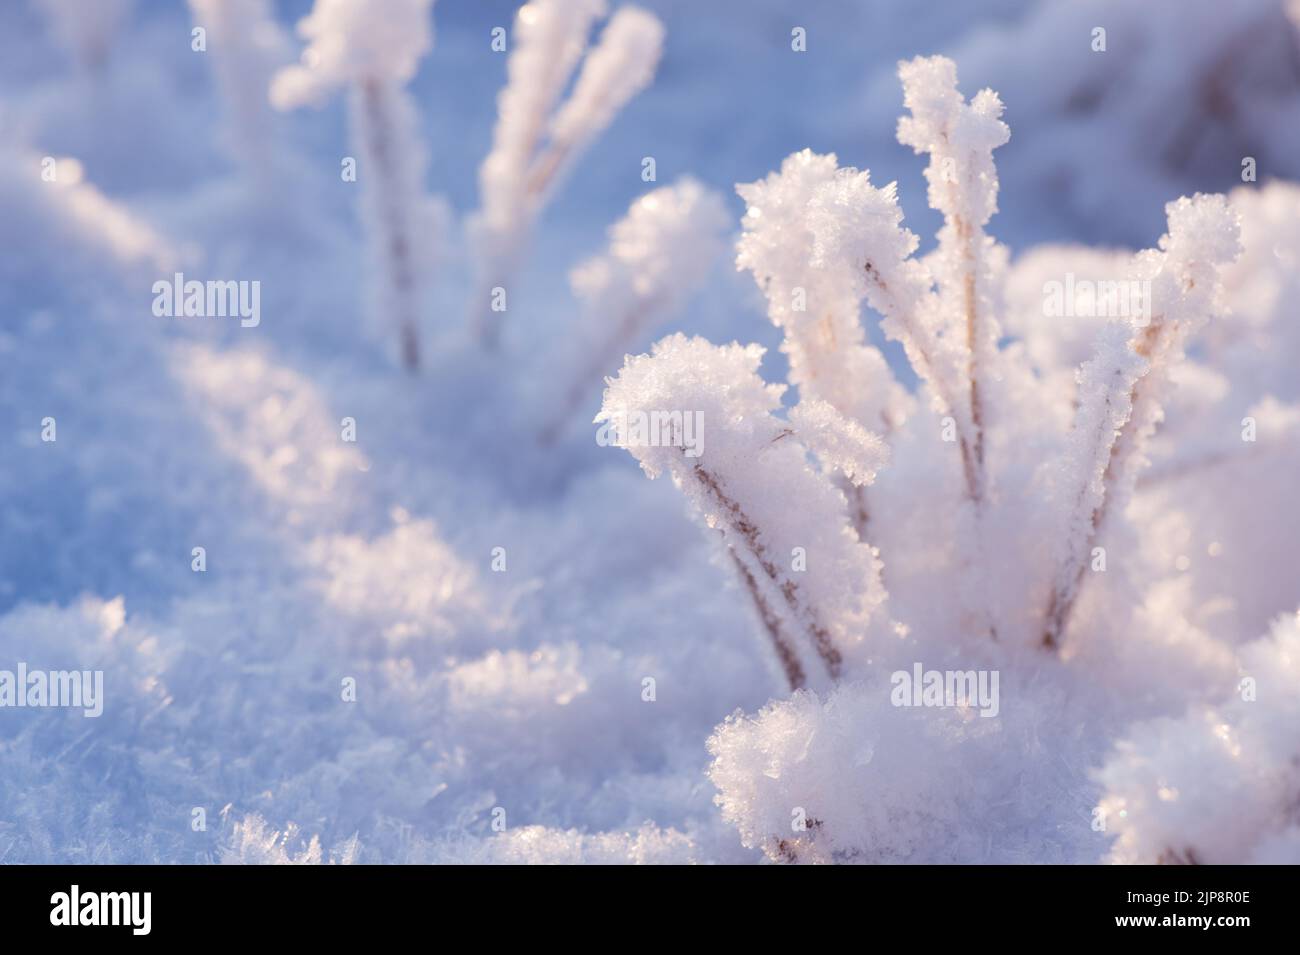 Fresh snow and hoarfrost on dried plants. Selective focus and shallow depth of field. Stock Photo